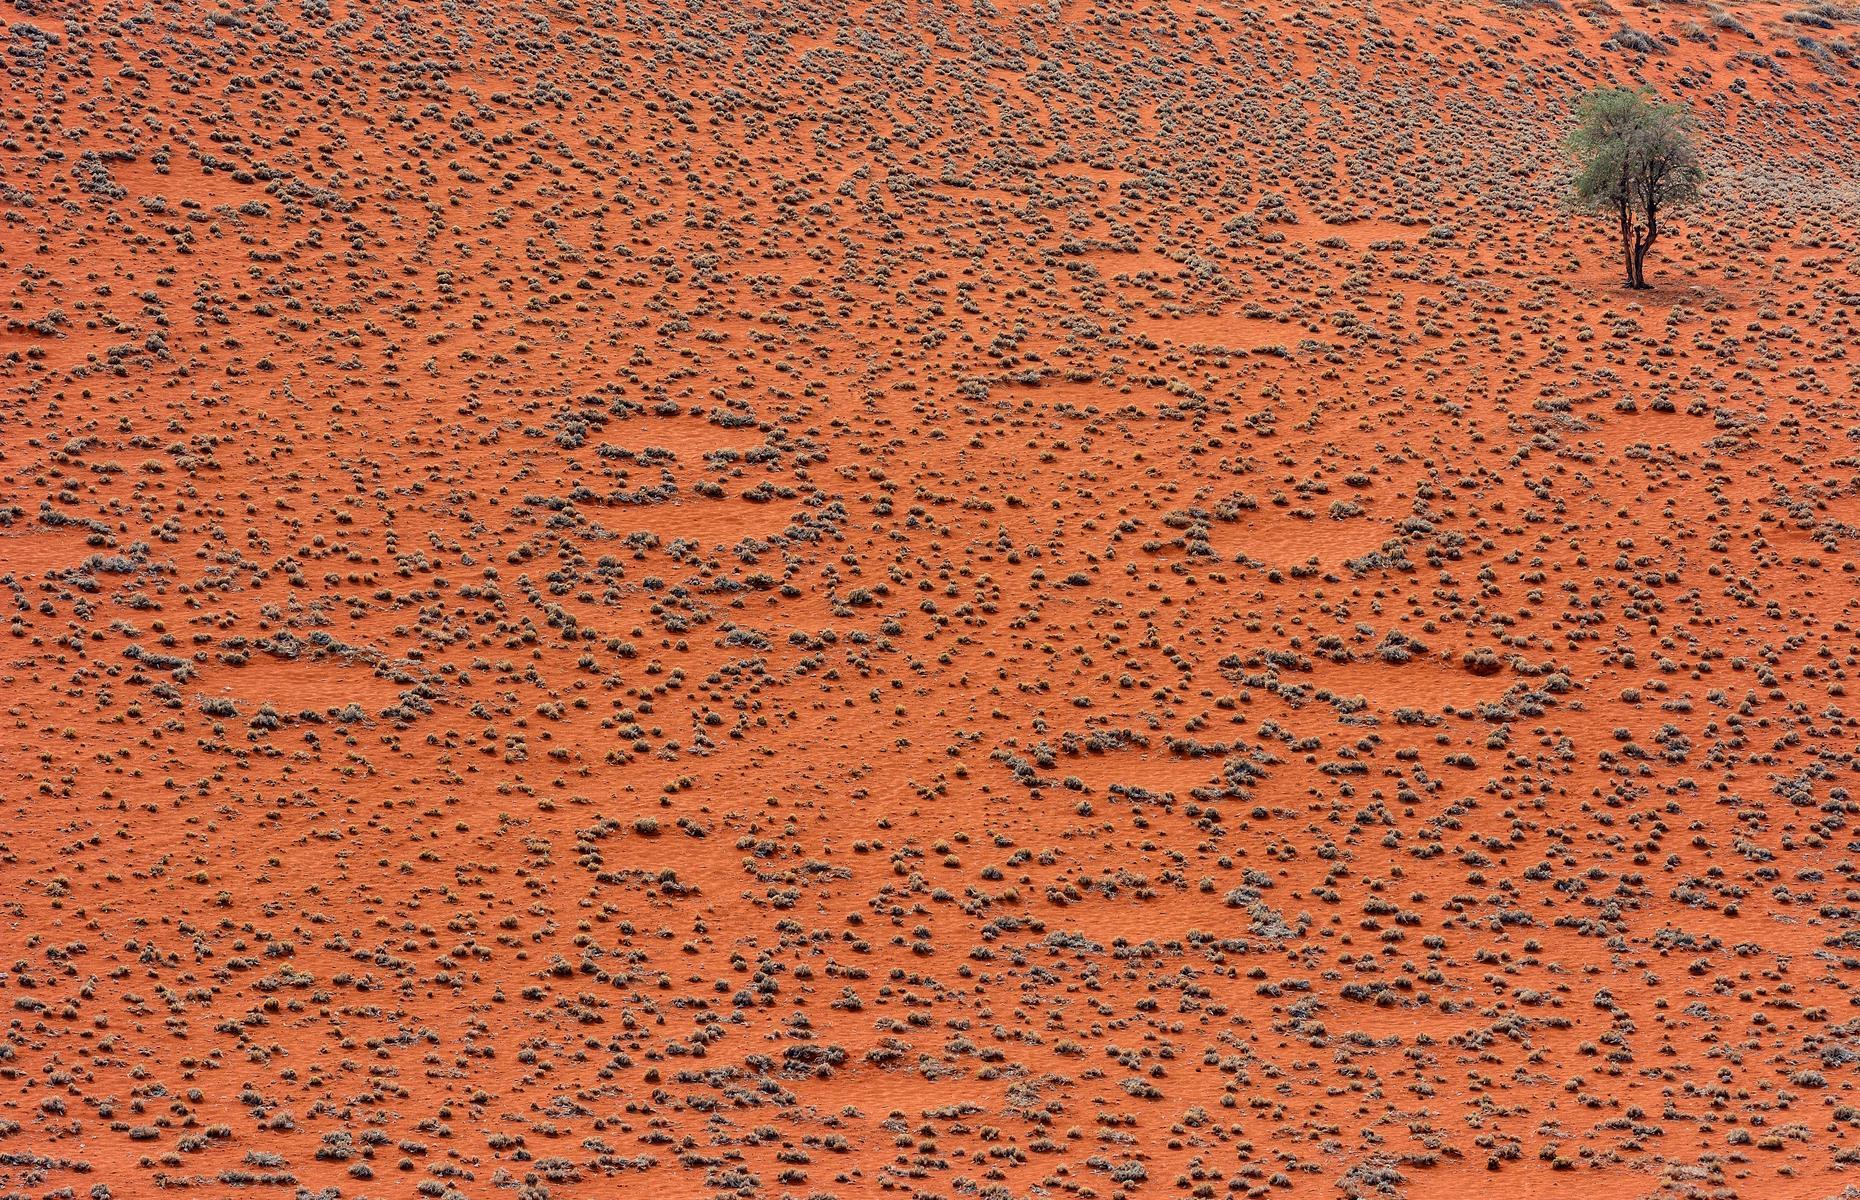 <p>One theory suggests that underground termites help to shape the circles, while another proposes that competition between different grasses in the desert is behind their formation. In 2021, a new study by researchers at the University of Pretoria argues that the distinctive markings are created as a plant releases toxic sap into the ground when it dies, stopping other plants from growing in these regions. The study’s authors noted that rising temperatures in Namibia may have fueled increased competition between these plants, causing more of them to die and creating more fairy circles.</p>  <p><a href="https://www.loveexploring.com/gallerylist/89068/the-most-mysterious-places-on-earth"><strong>Next, discover the most mysterious places on the planet</strong></a></p>